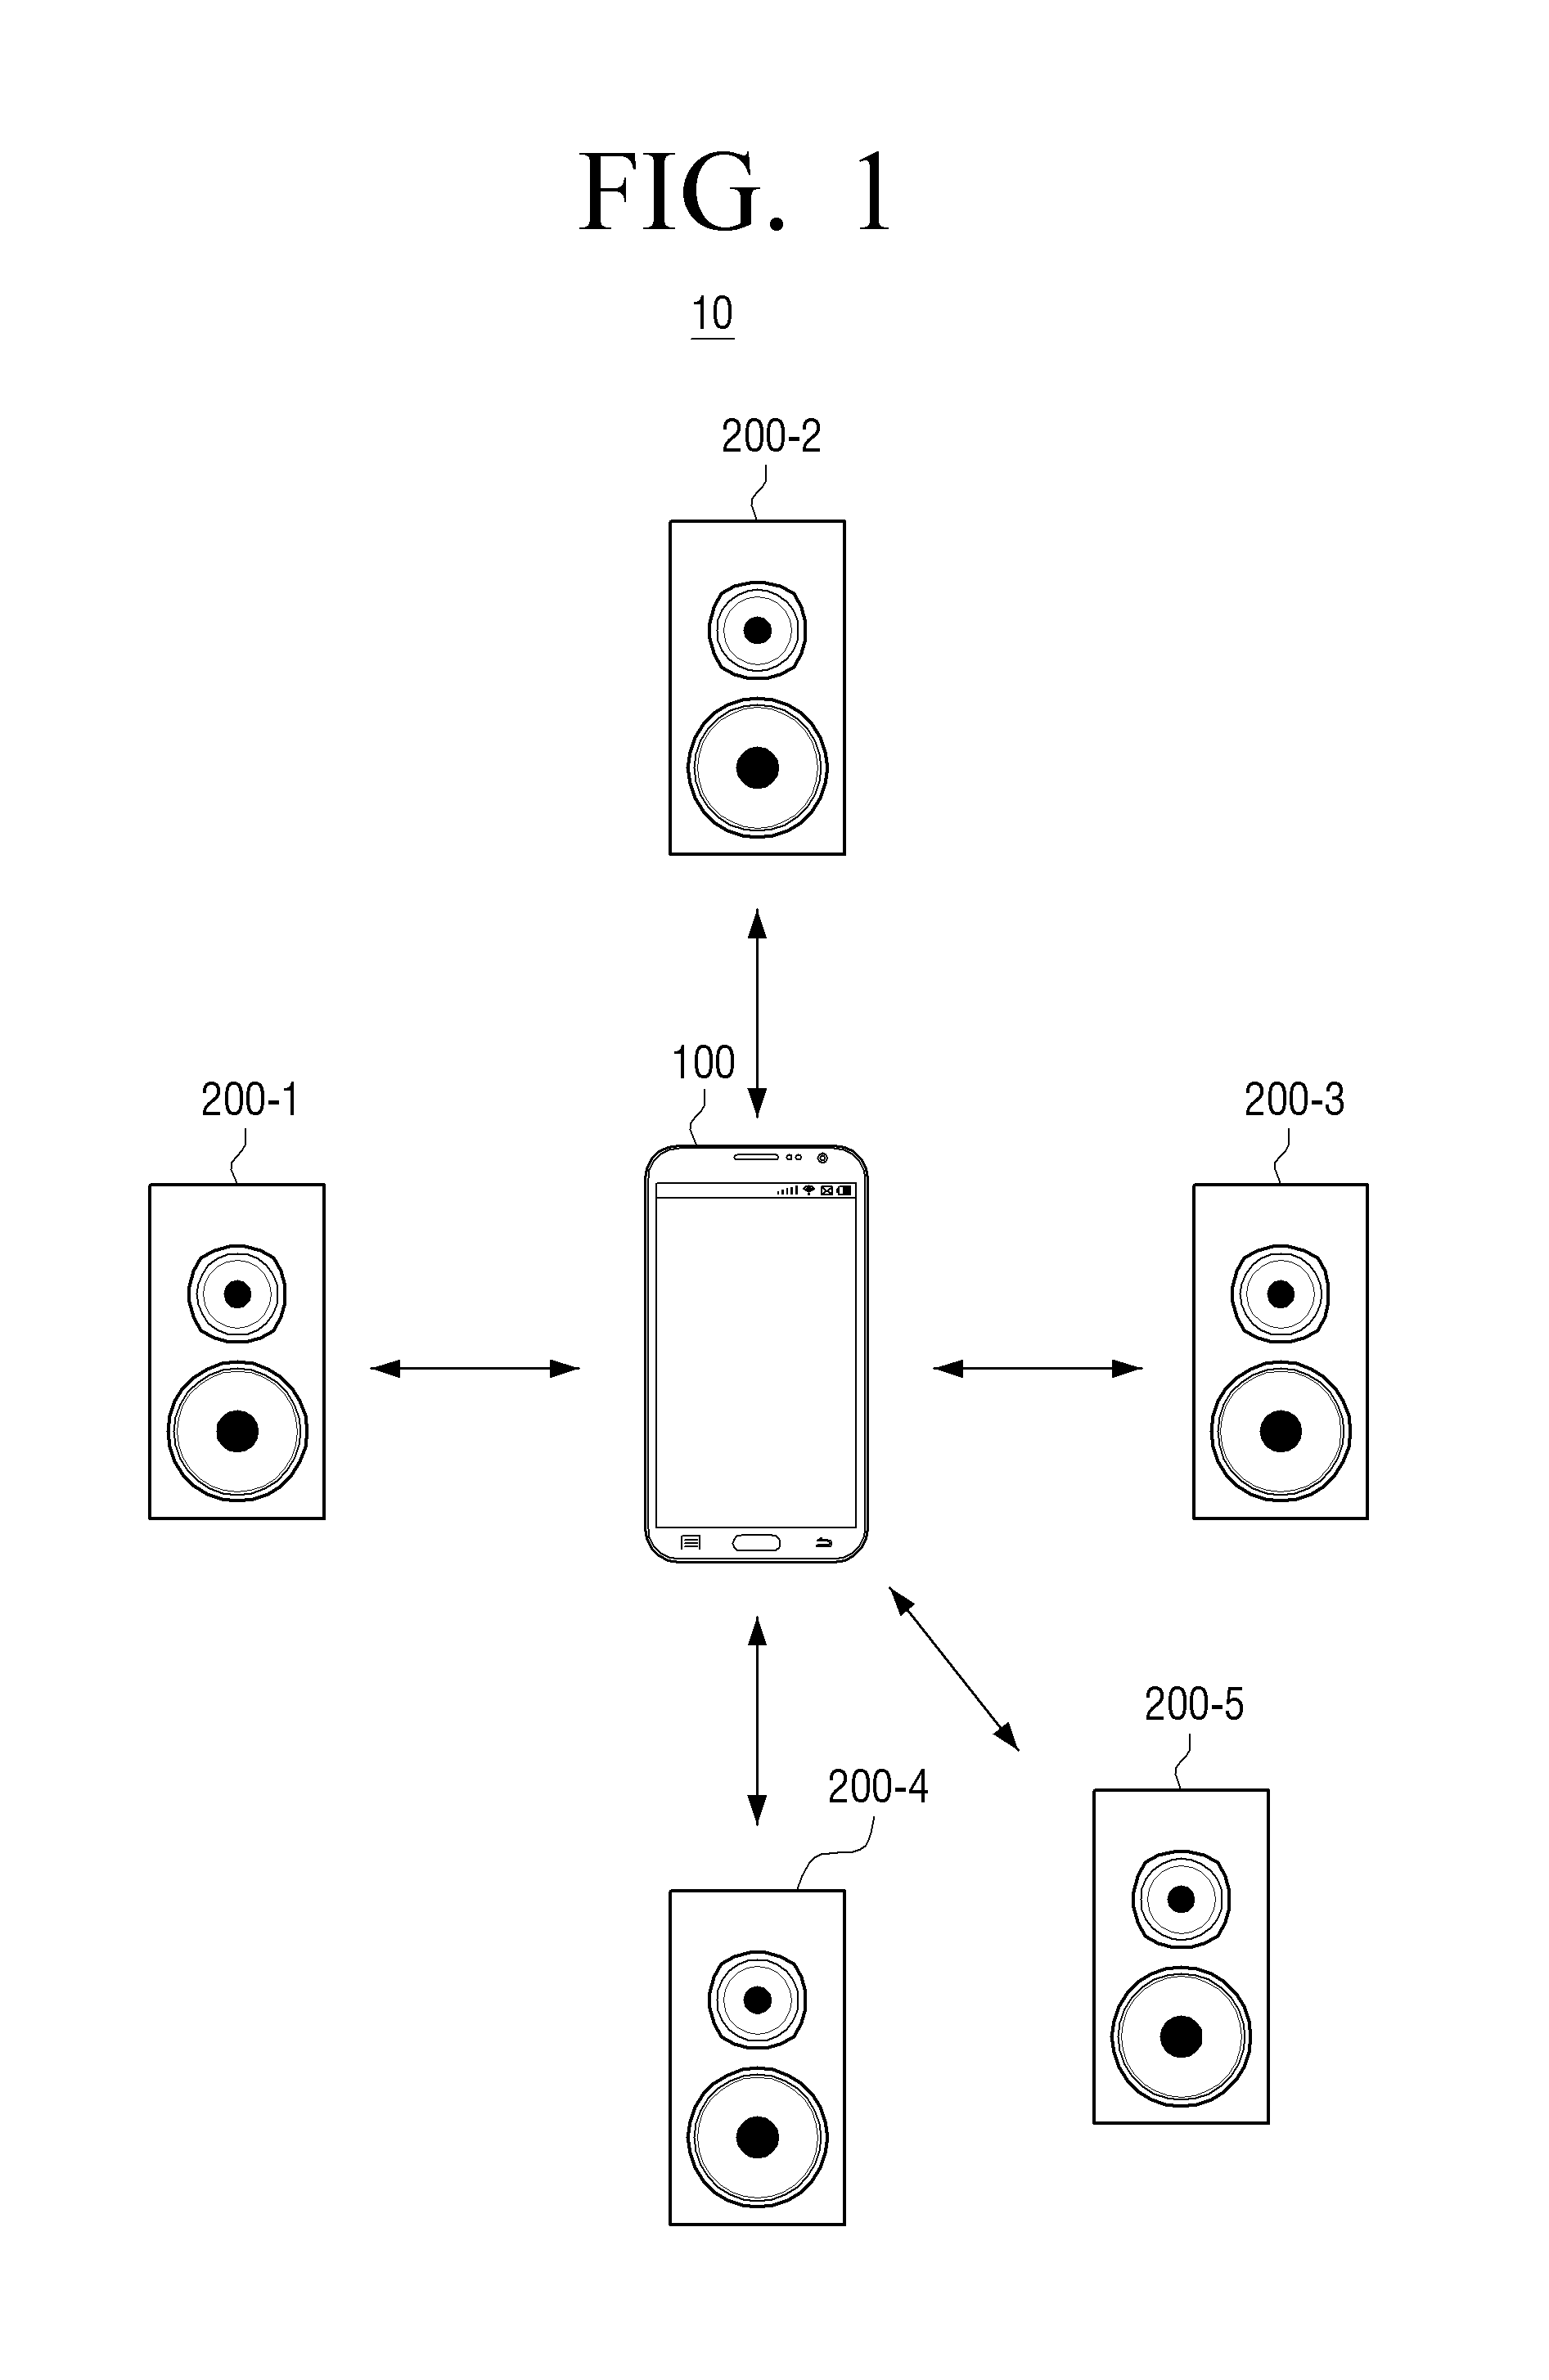 Display apparatus and controlling method thereof